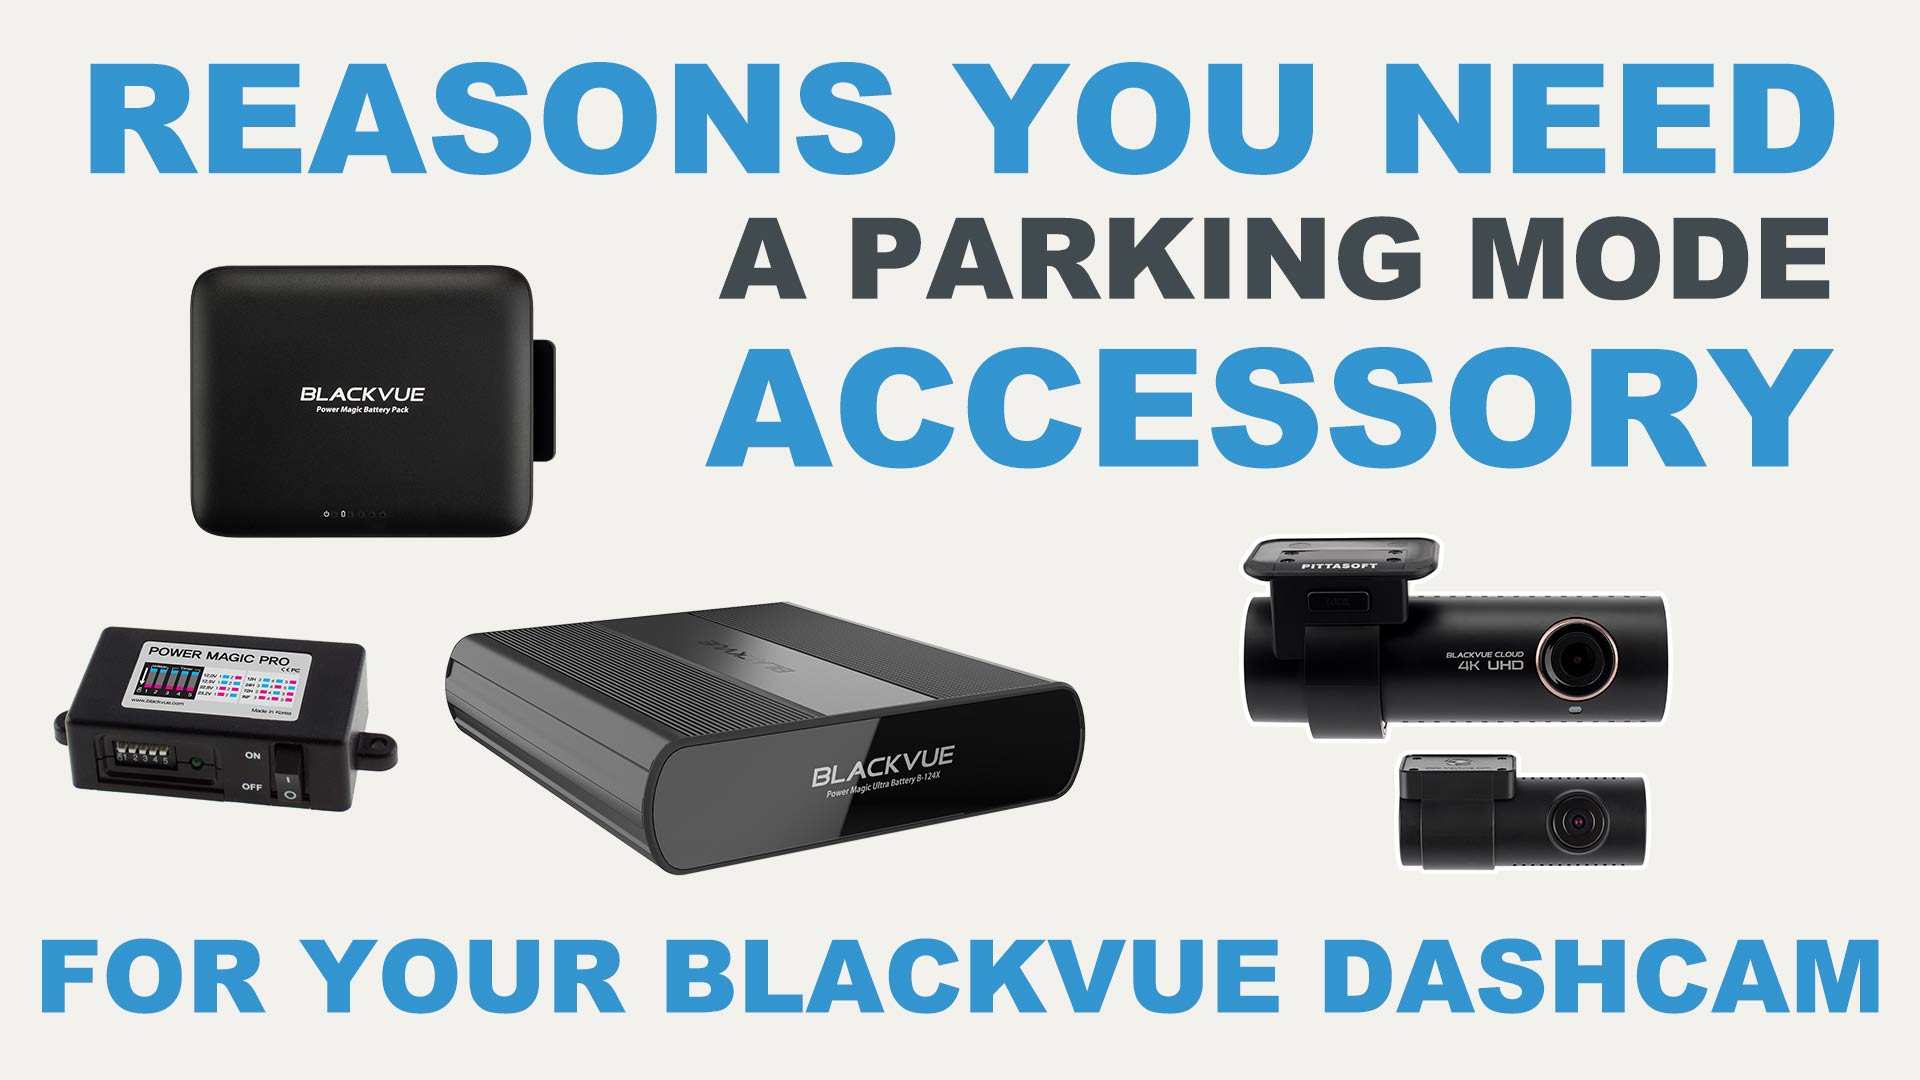 Reasons You Need a Parking Mode Accessory for your BlackVue Dashcam